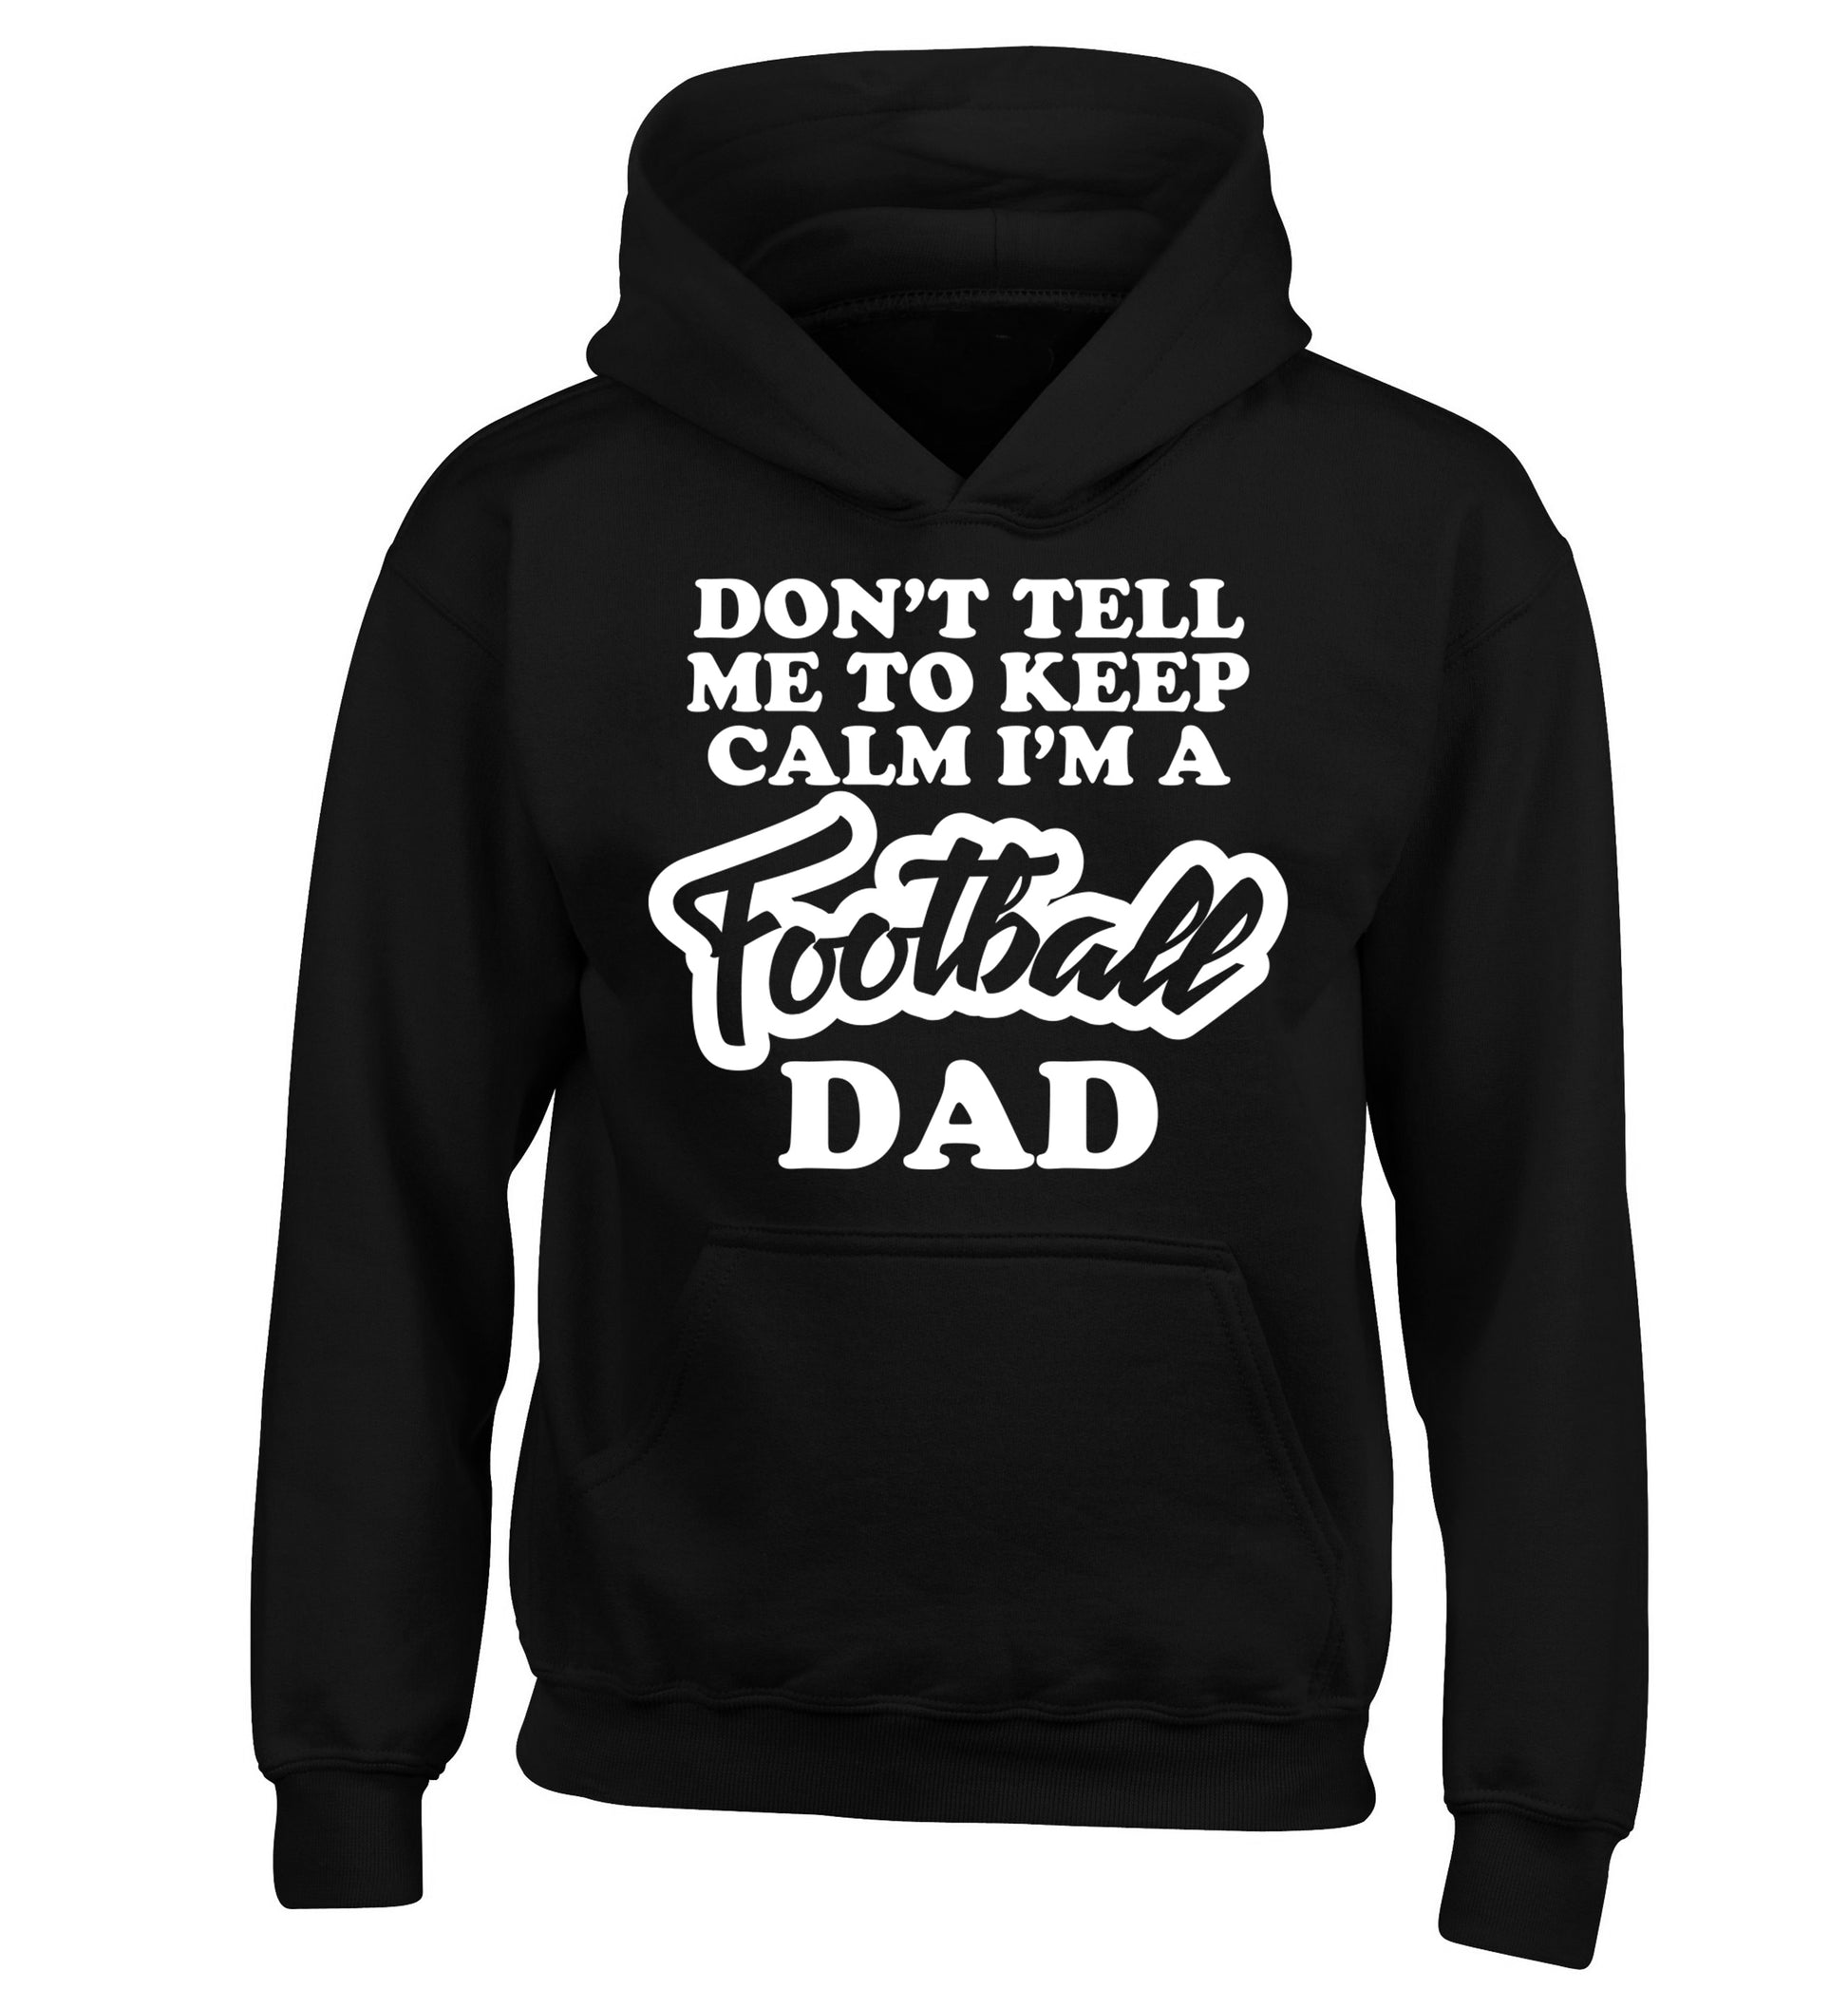 Don't tell me to keep calm I'm a football dad children's black hoodie 12-14 Years